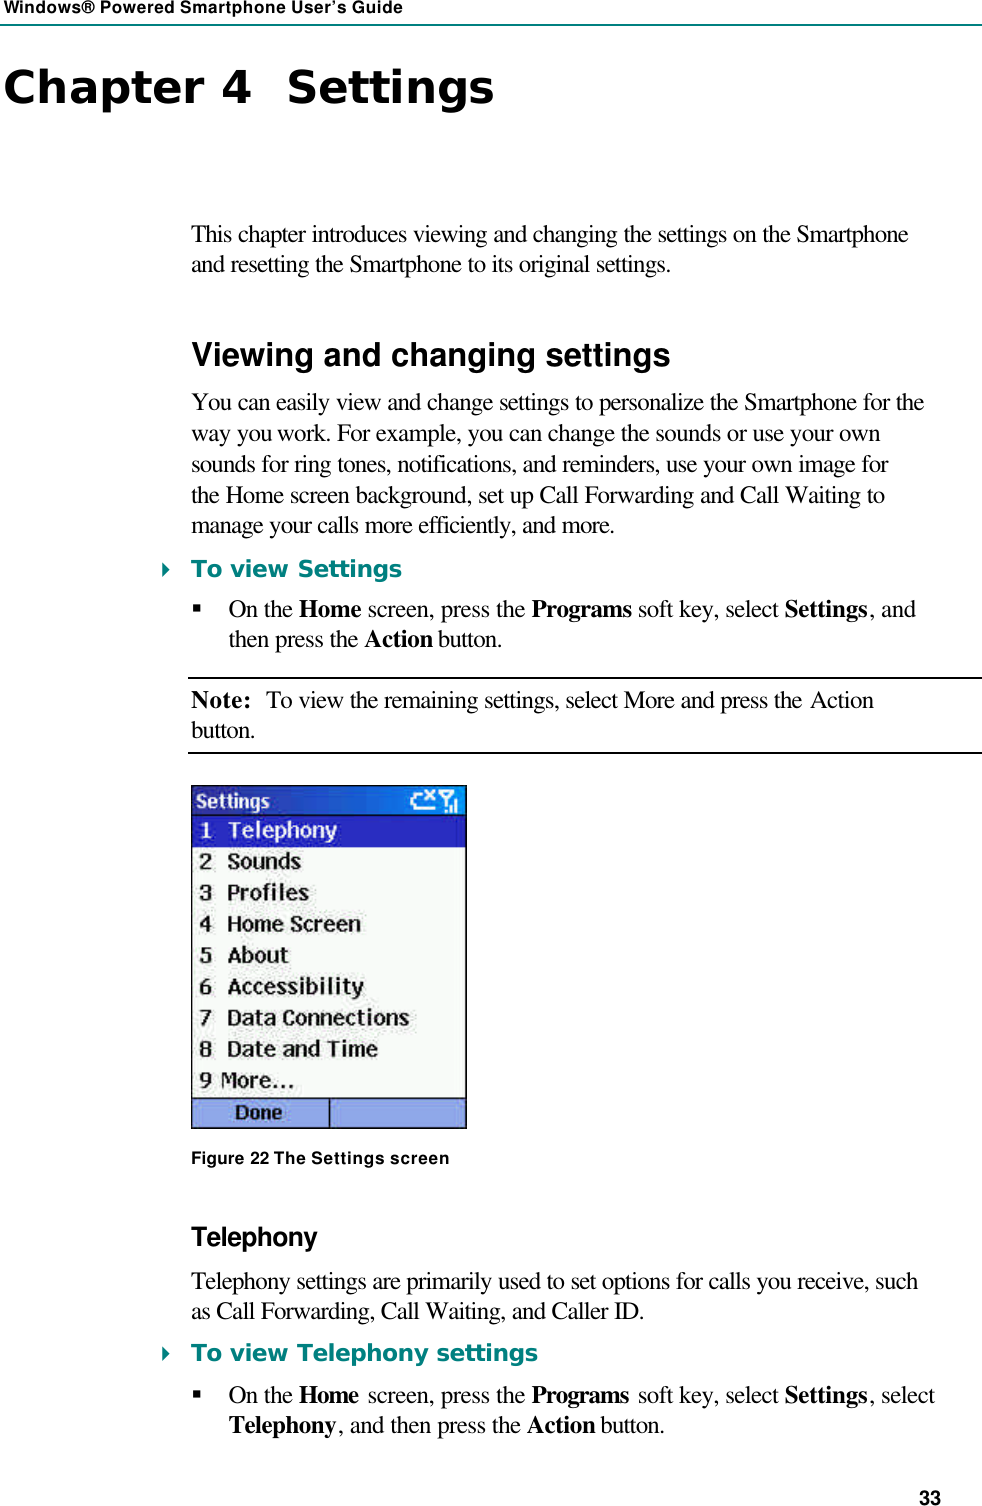 Windows® Powered Smartphone User’s Guide 33 Chapter 4  Settings This chapter introduces viewing and changing the settings on the Smartphone and resetting the Smartphone to its original settings. Viewing and changing settings You can easily view and change settings to personalize the Smartphone for the way you work. For example, you can change the sounds or use your own sounds for ring tones, notifications, and reminders, use your own image for the Home screen background, set up Call Forwarding and Call Waiting to manage your calls more efficiently, and more. 4 To view Settings § On the Home screen, press the Programs soft key, select Settings, and then press the Action button. Note: To view the remaining settings, select More and press the Action button.  Figure 22 The Settings screen Telephony Telephony settings are primarily used to set options for calls you receive, such as Call Forwarding, Call Waiting, and Caller ID. 4 To view Telephony settings § On the Home screen, press the Programs soft key, select Settings, select Telephony, and then press the Action button. 